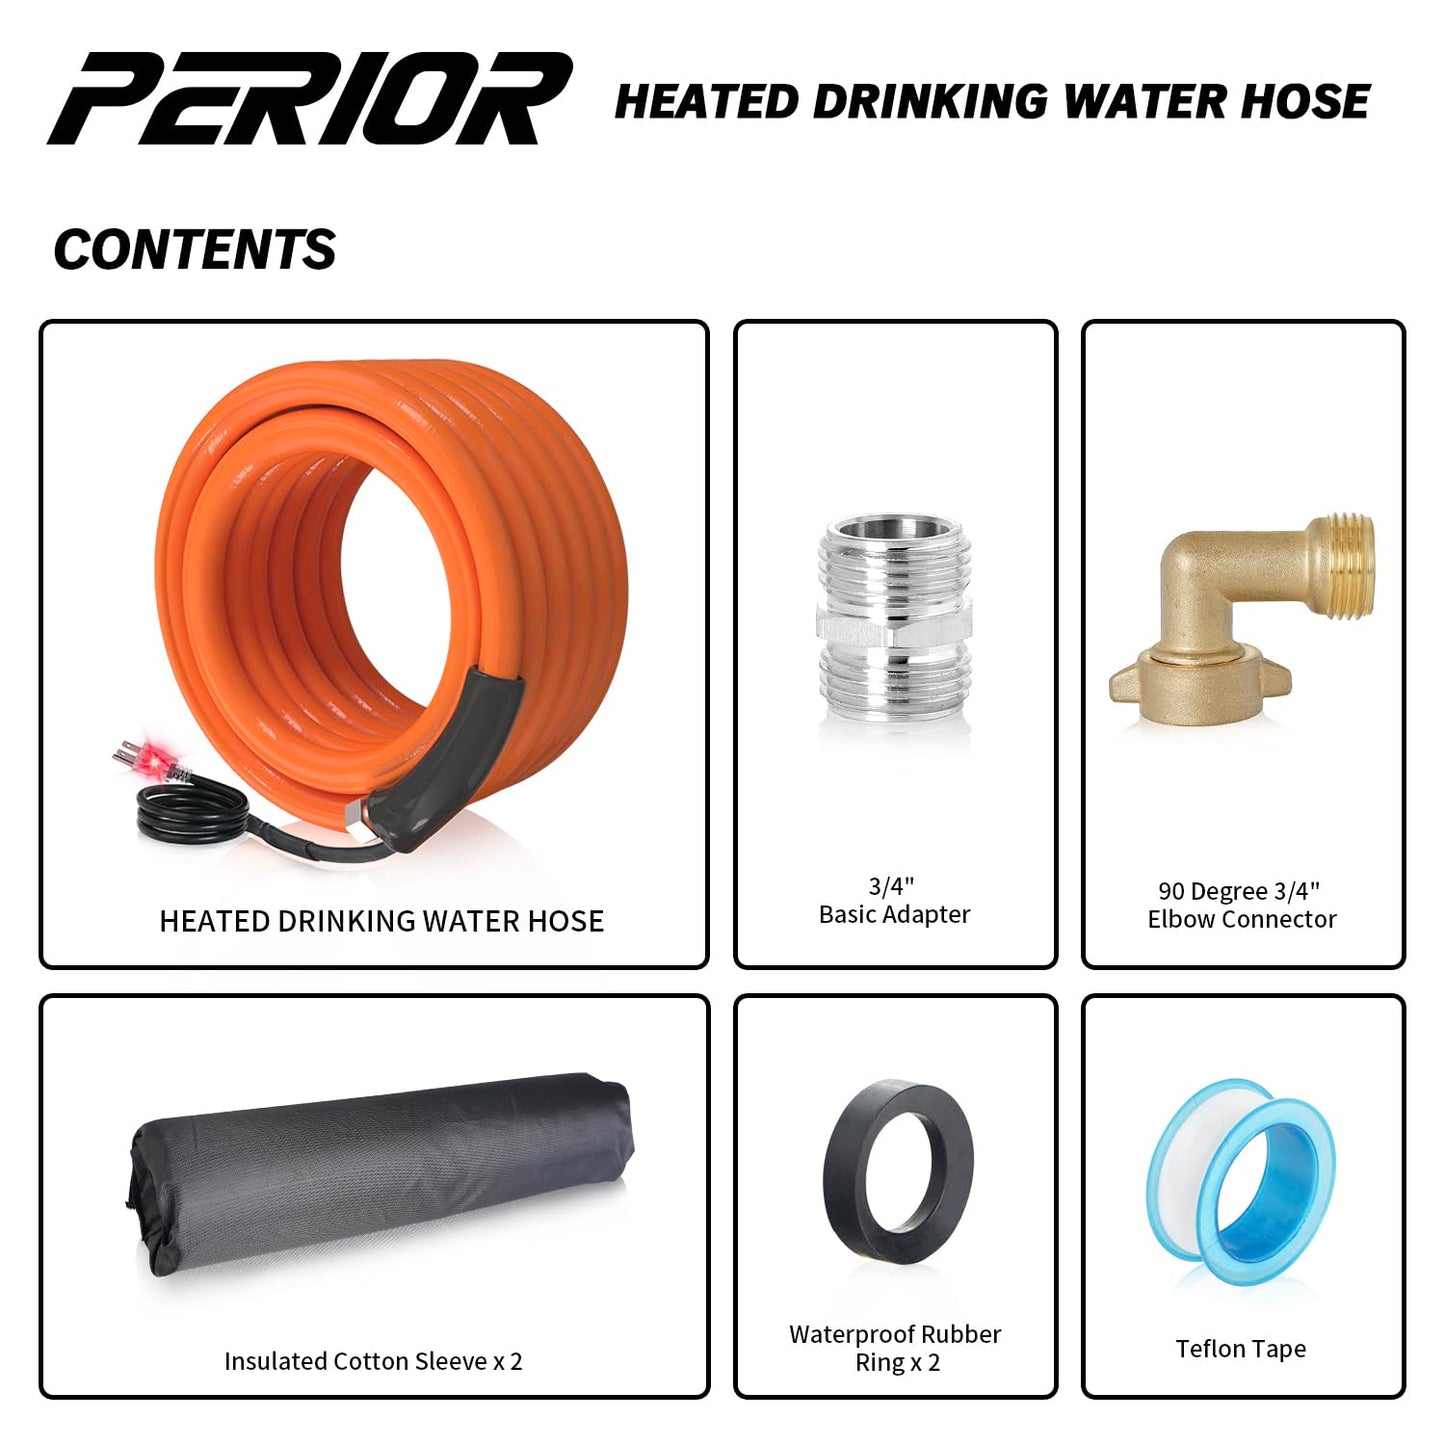 PERIOR Heated Water hose, 50FT | 5/8" Inner Diameter with Outdoor Water Line Freeze Protection, RV Drinking Hose -40°F with Self-Regulating Thermostat and BPA Free, Energy Saving